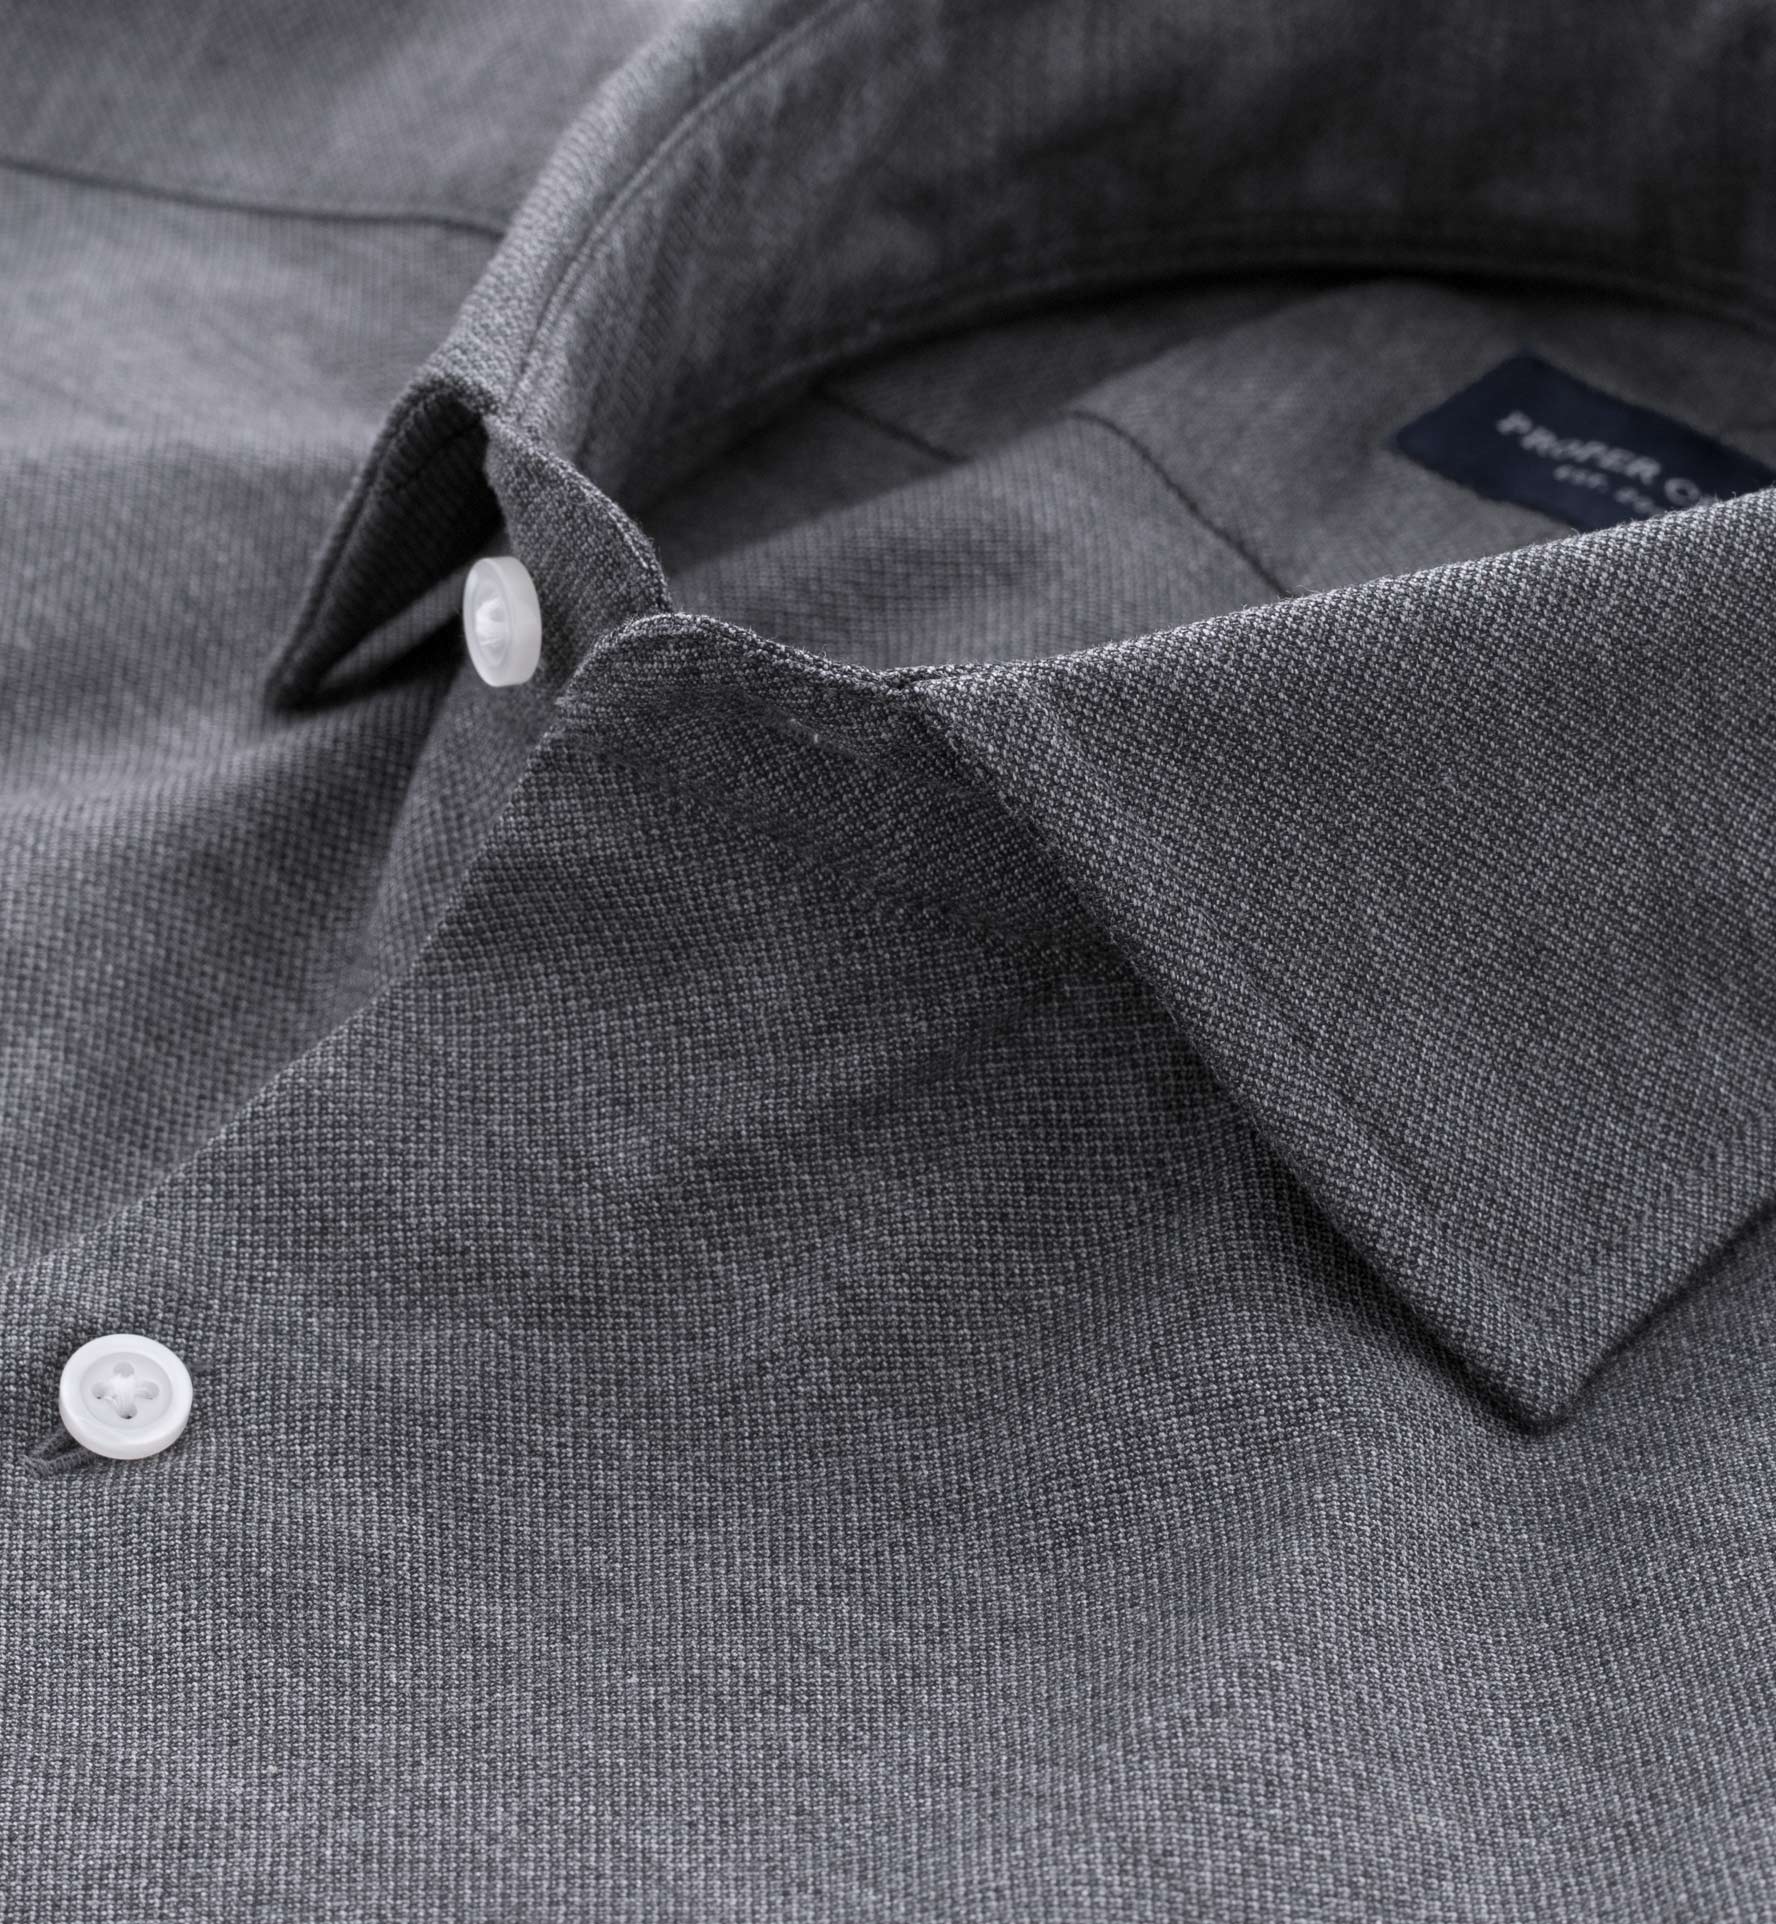 Charcoal Melange Pique Fitted Shirt by Proper Cloth